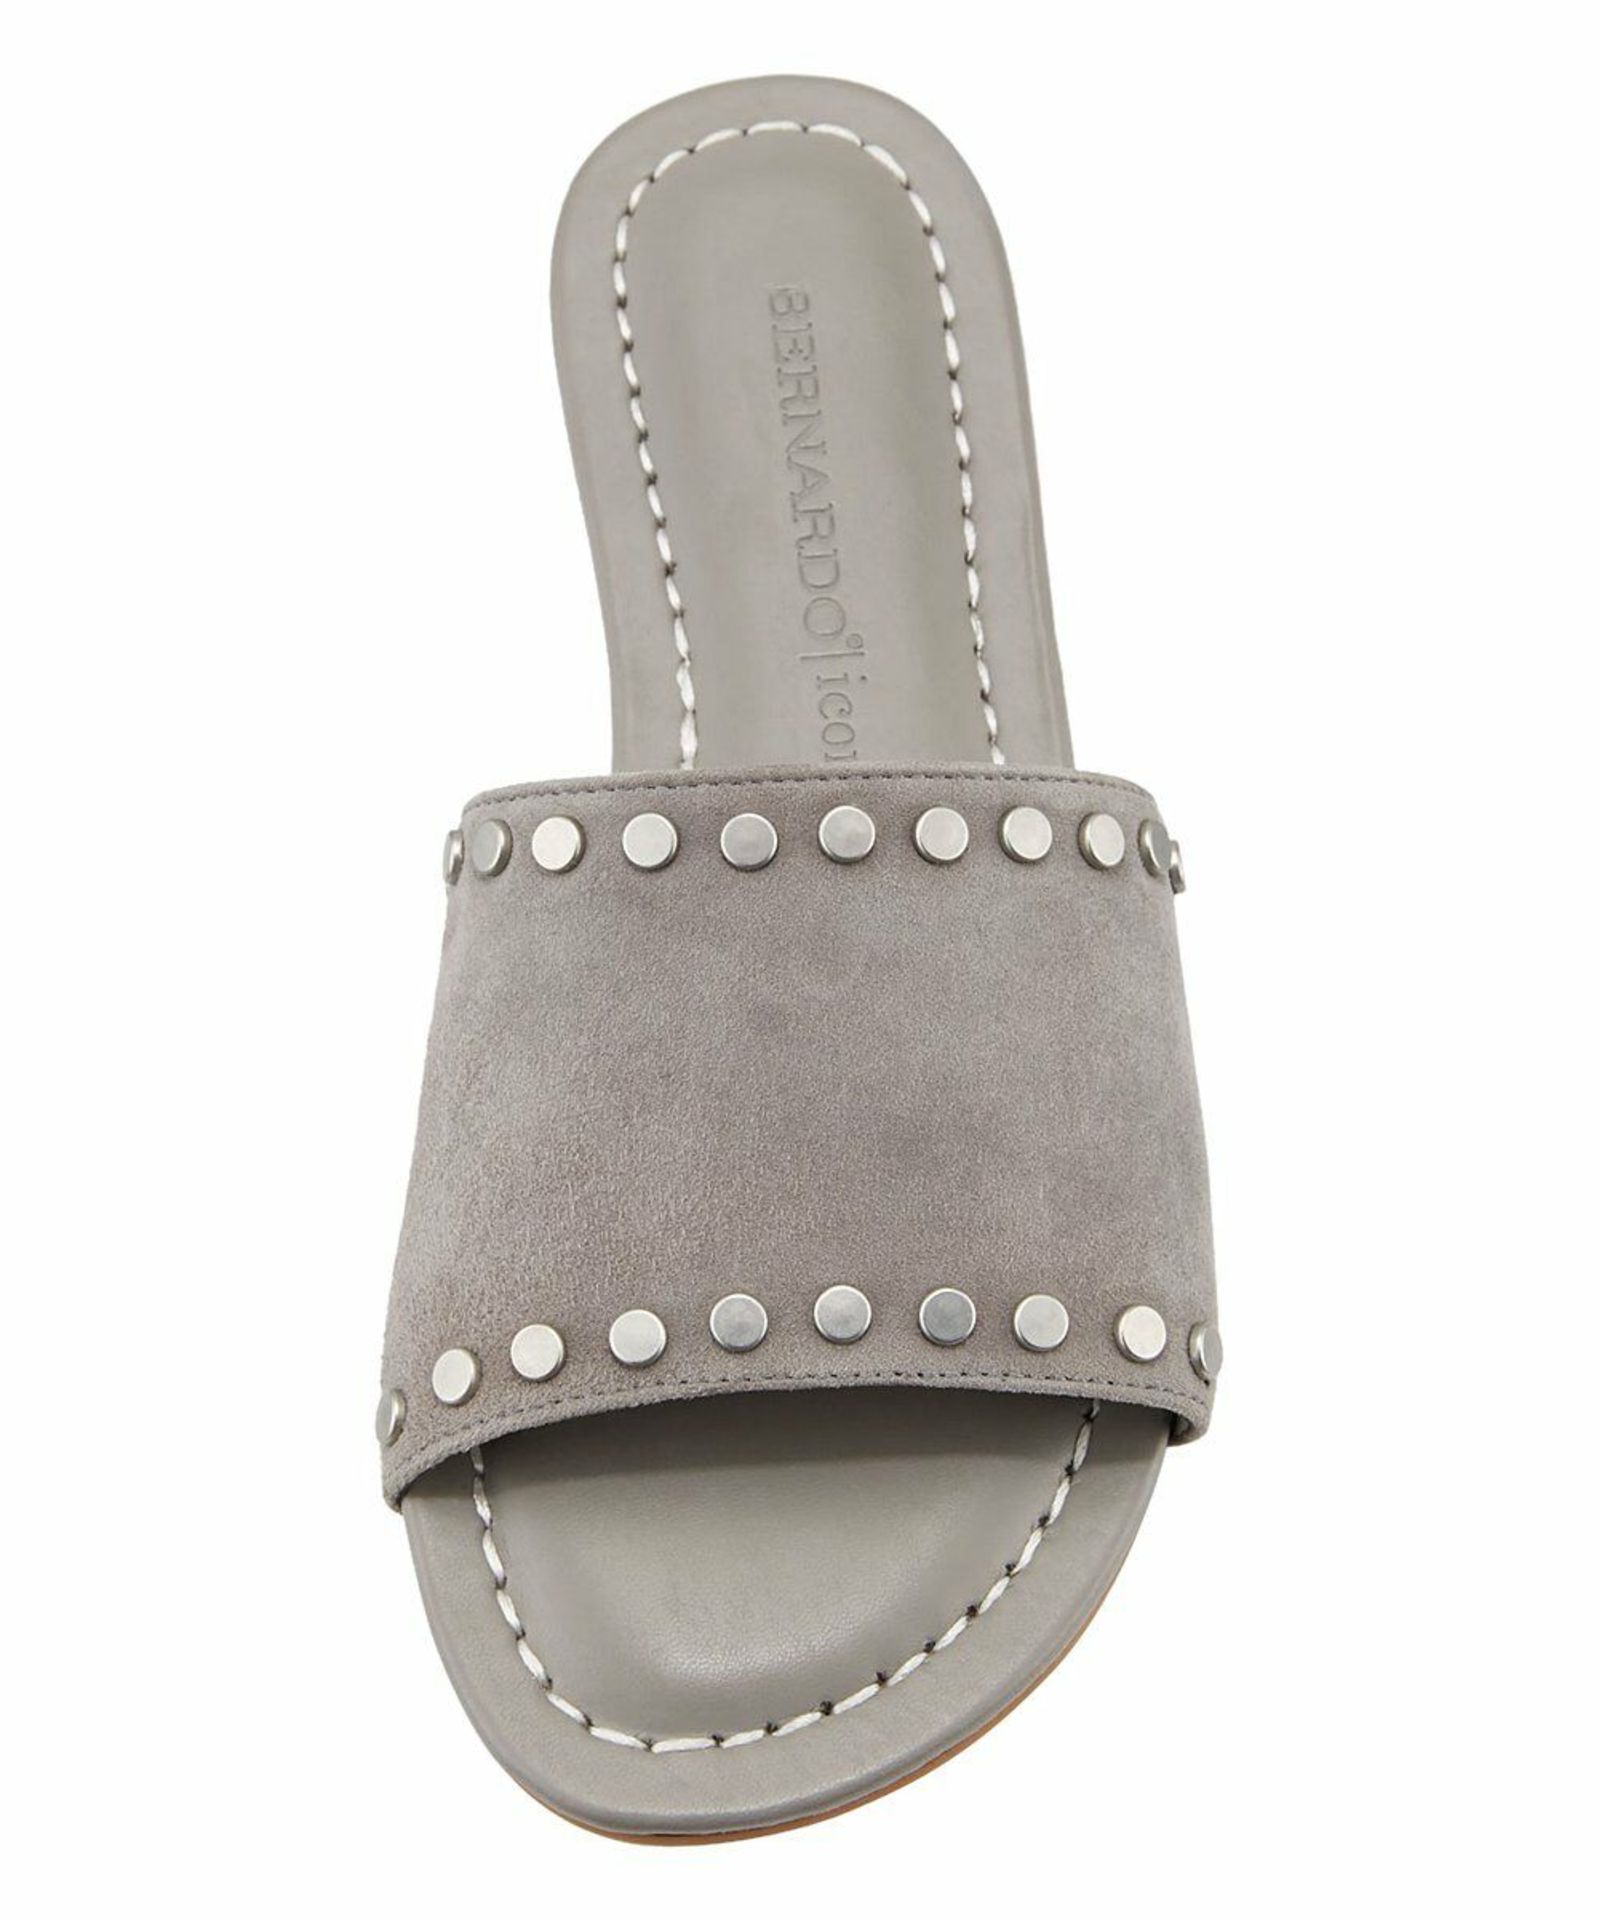 Bernardo Gray Maggie Suede Sandal (Uk Size 5.5:Us Size 7.5) (New With Box) [Ref: 49478356-E-001] - Image 4 of 4